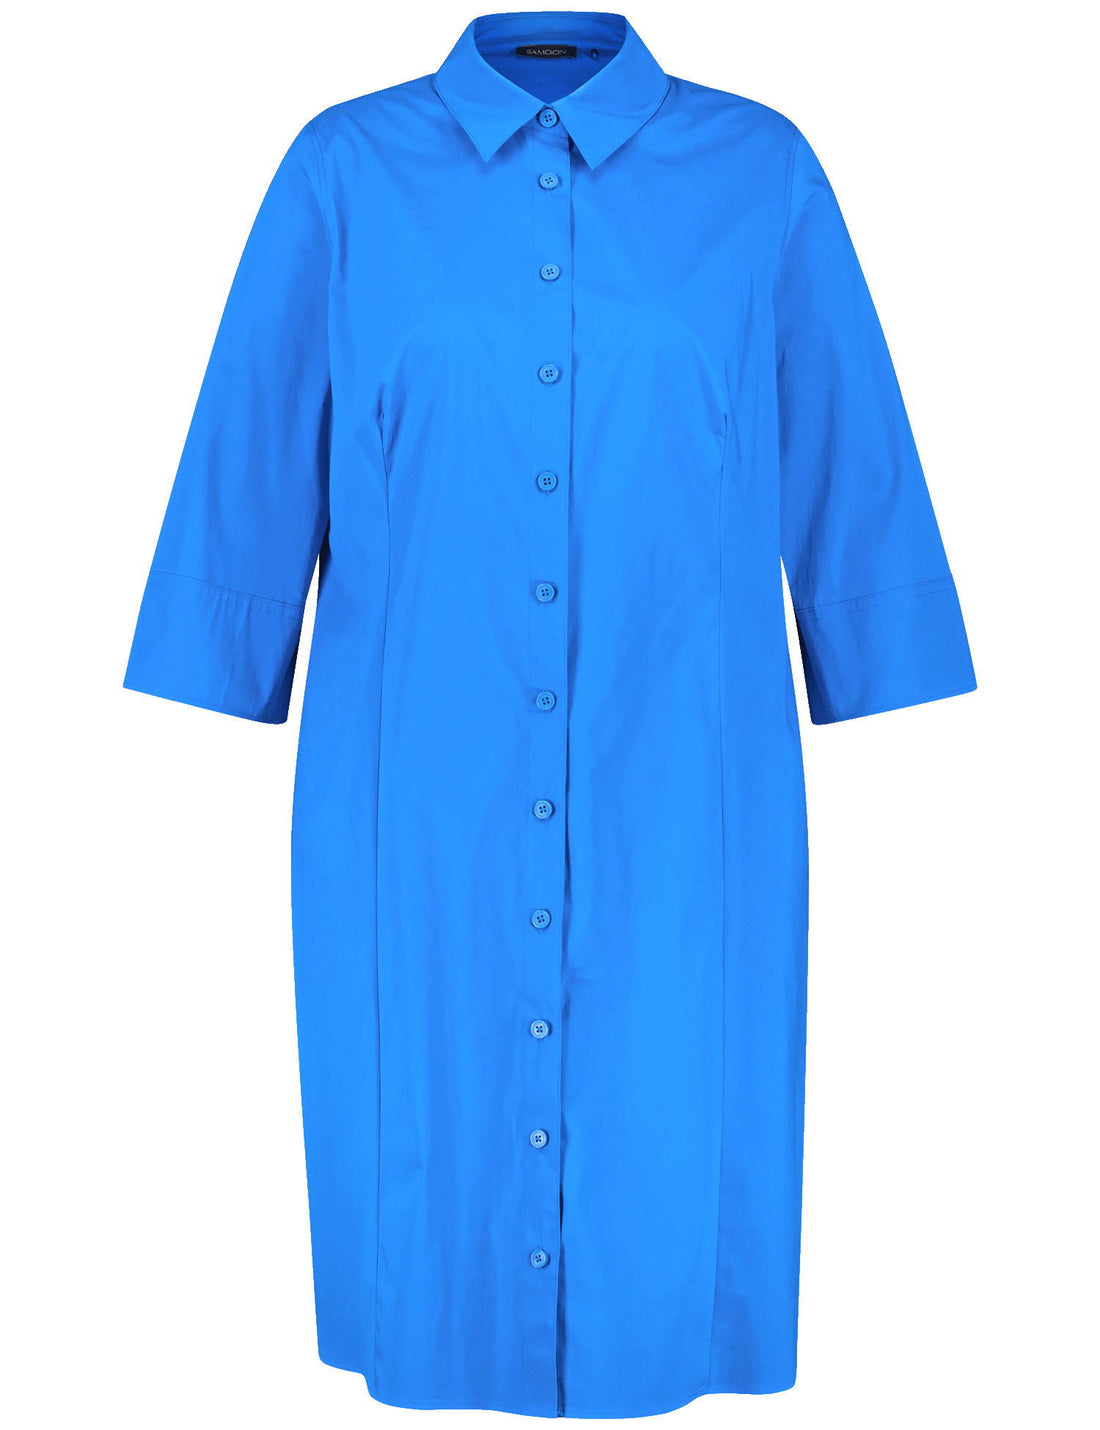 Blouse Dress With 3/4-Length Sleeves And Pockets_480008-21011_8840_02